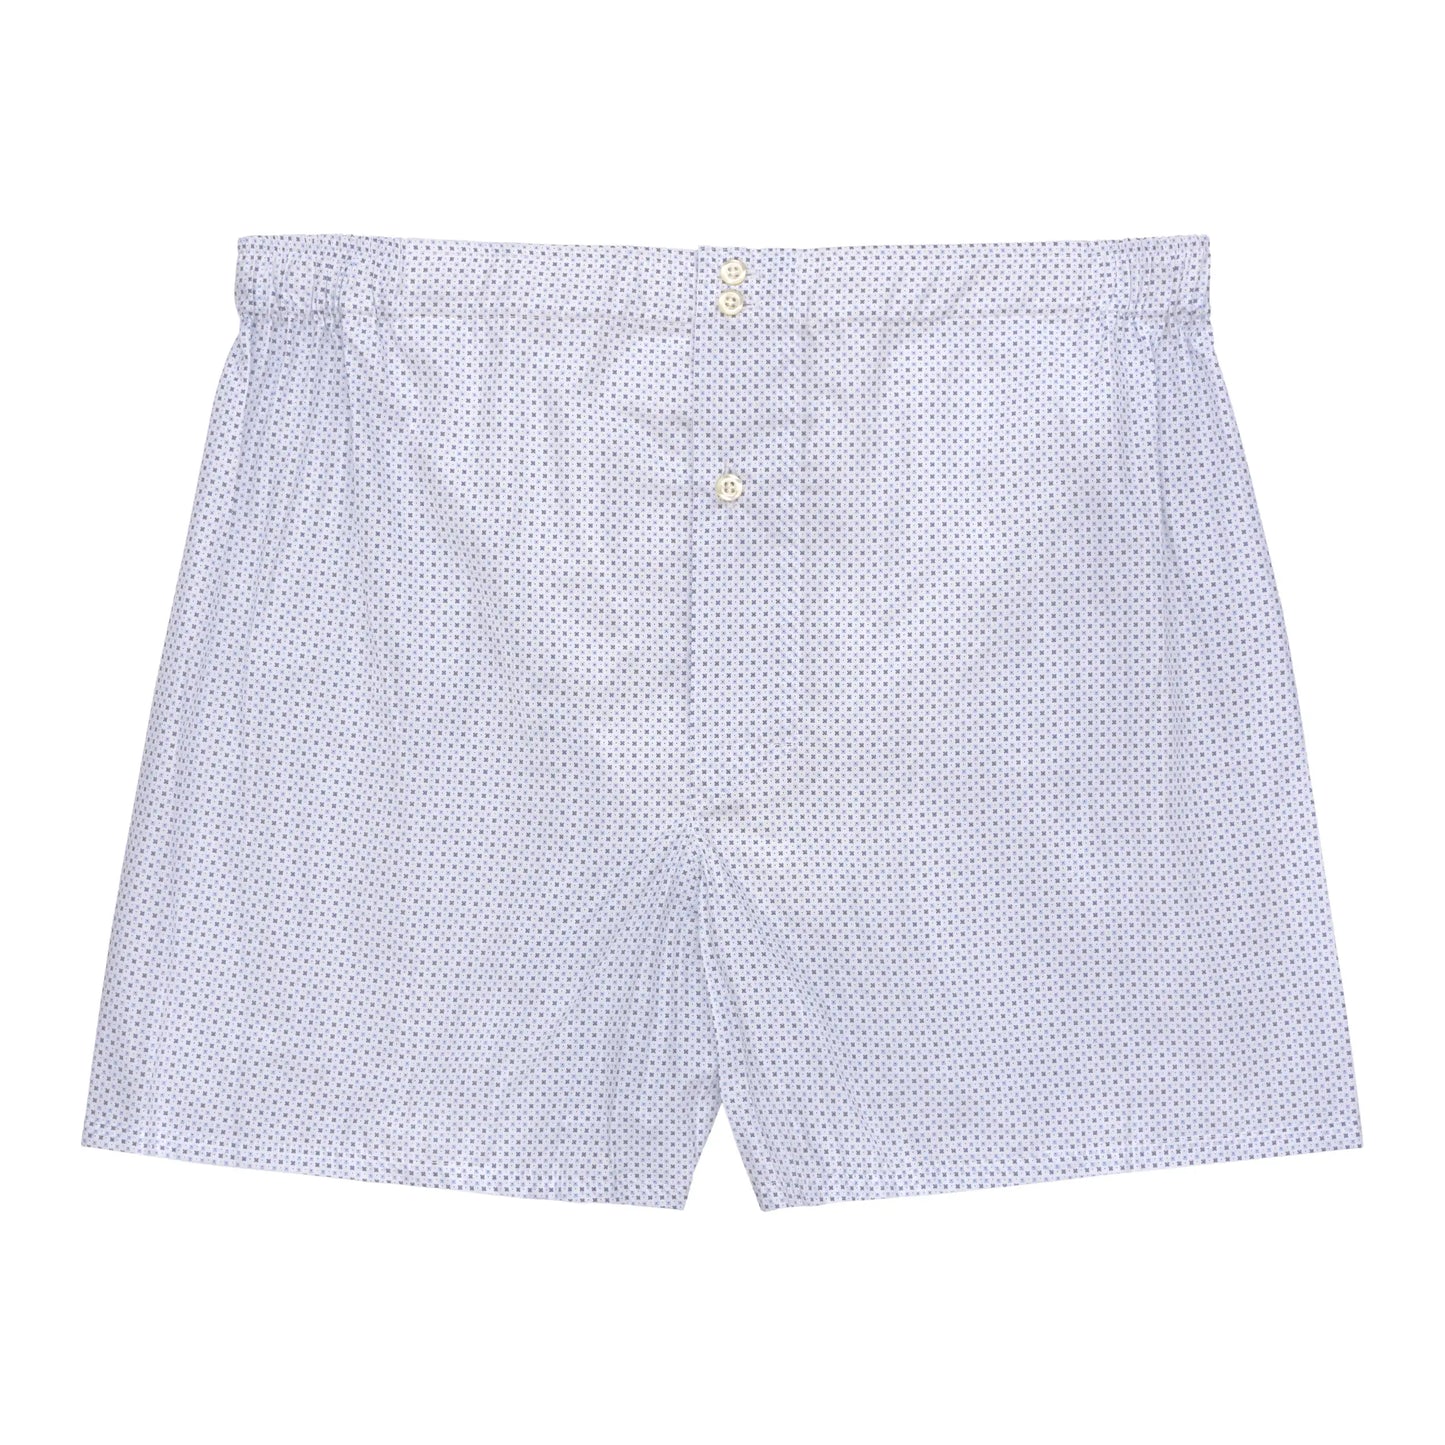 White Boxer Shorts with Blue Print